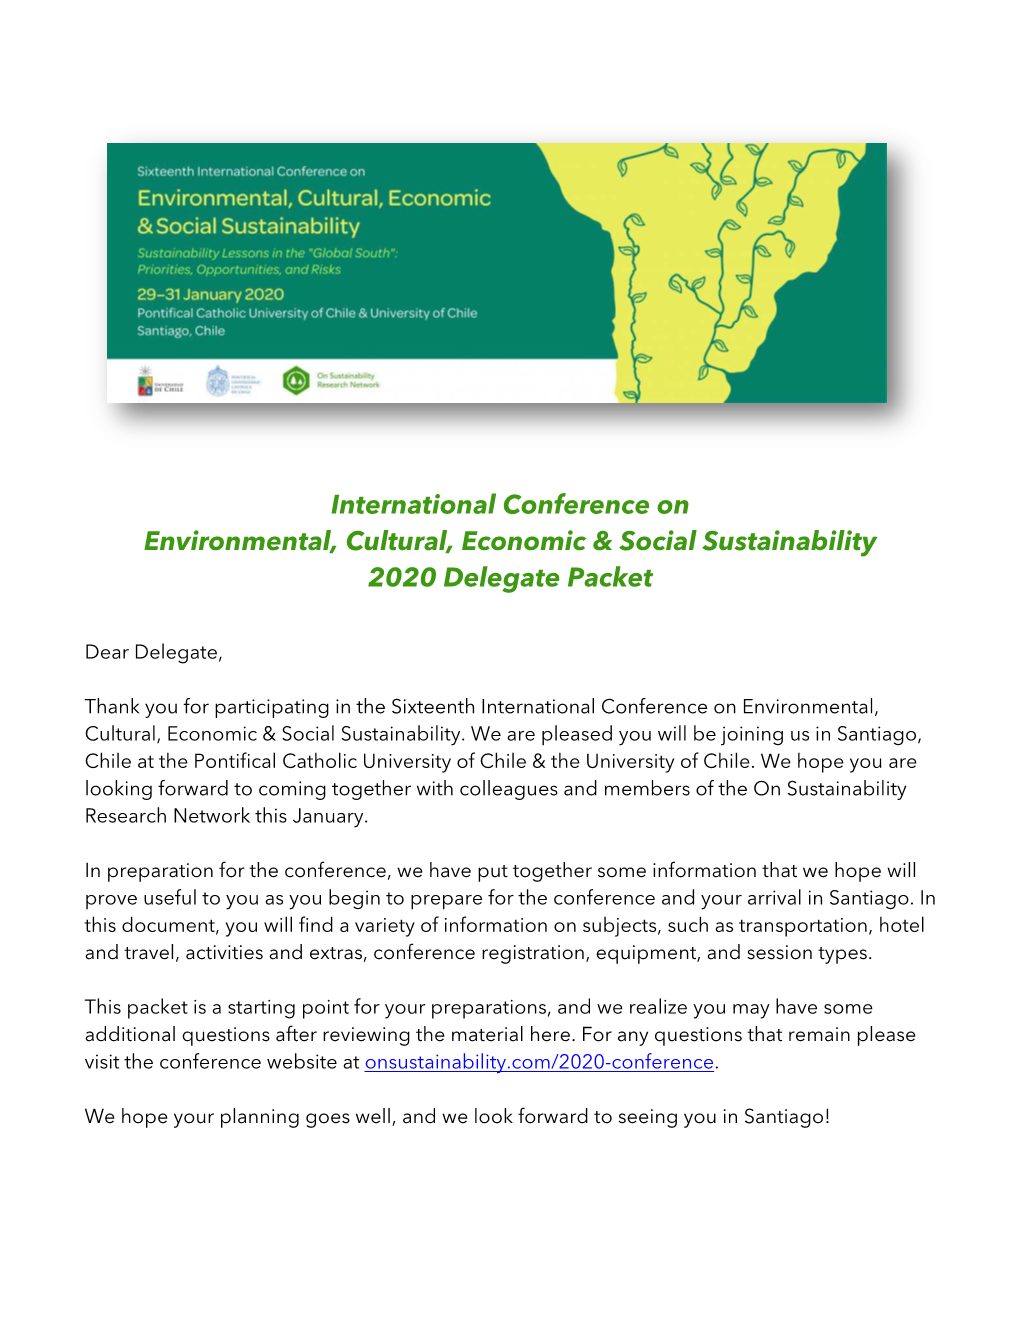 International Conference on Environmental, Cultural, Economic & Social Sustainability 2020 Delegate Packet